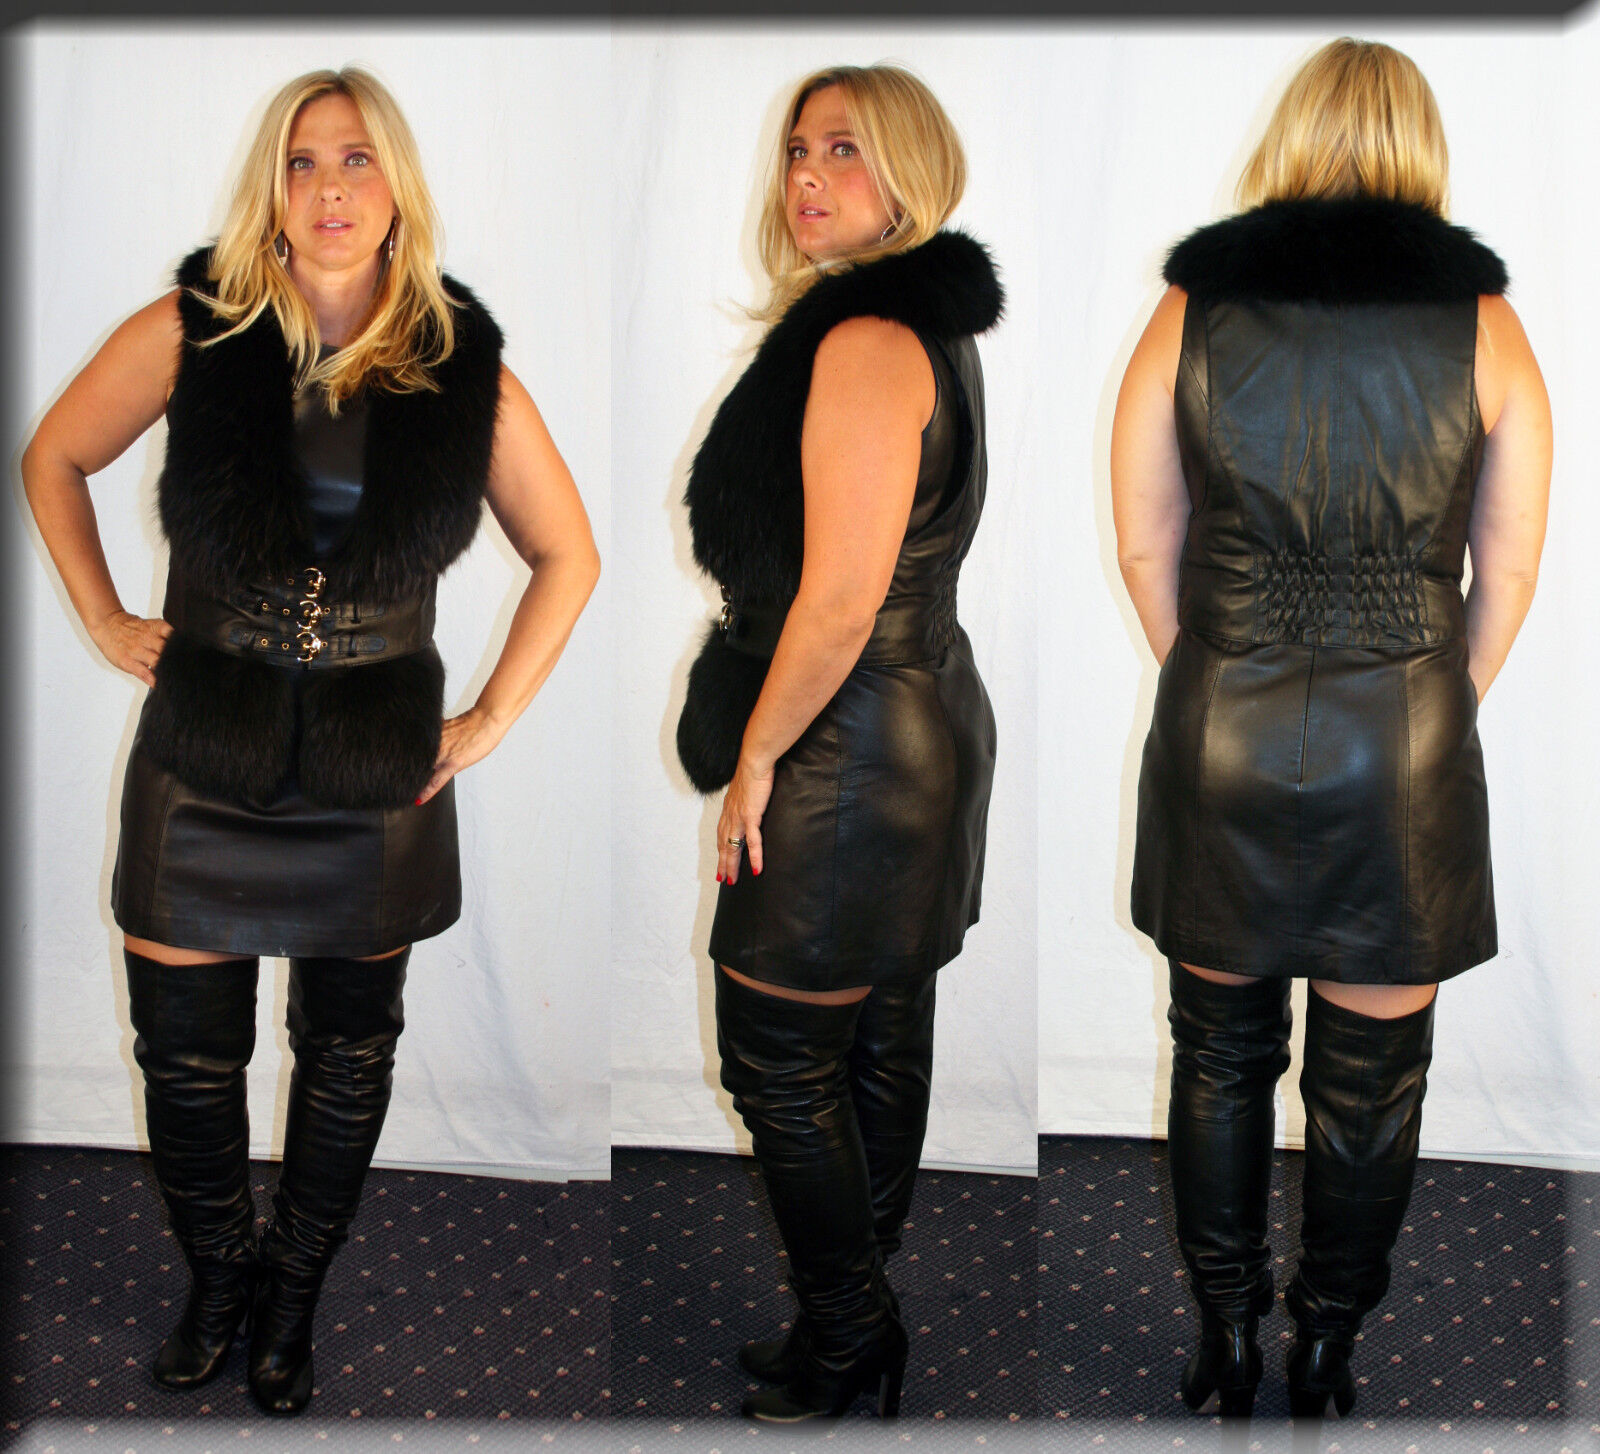 Pre-owned Efurs4less Black Lambskin Leather Fox Fur Vest - Size Large And Extra Large Available